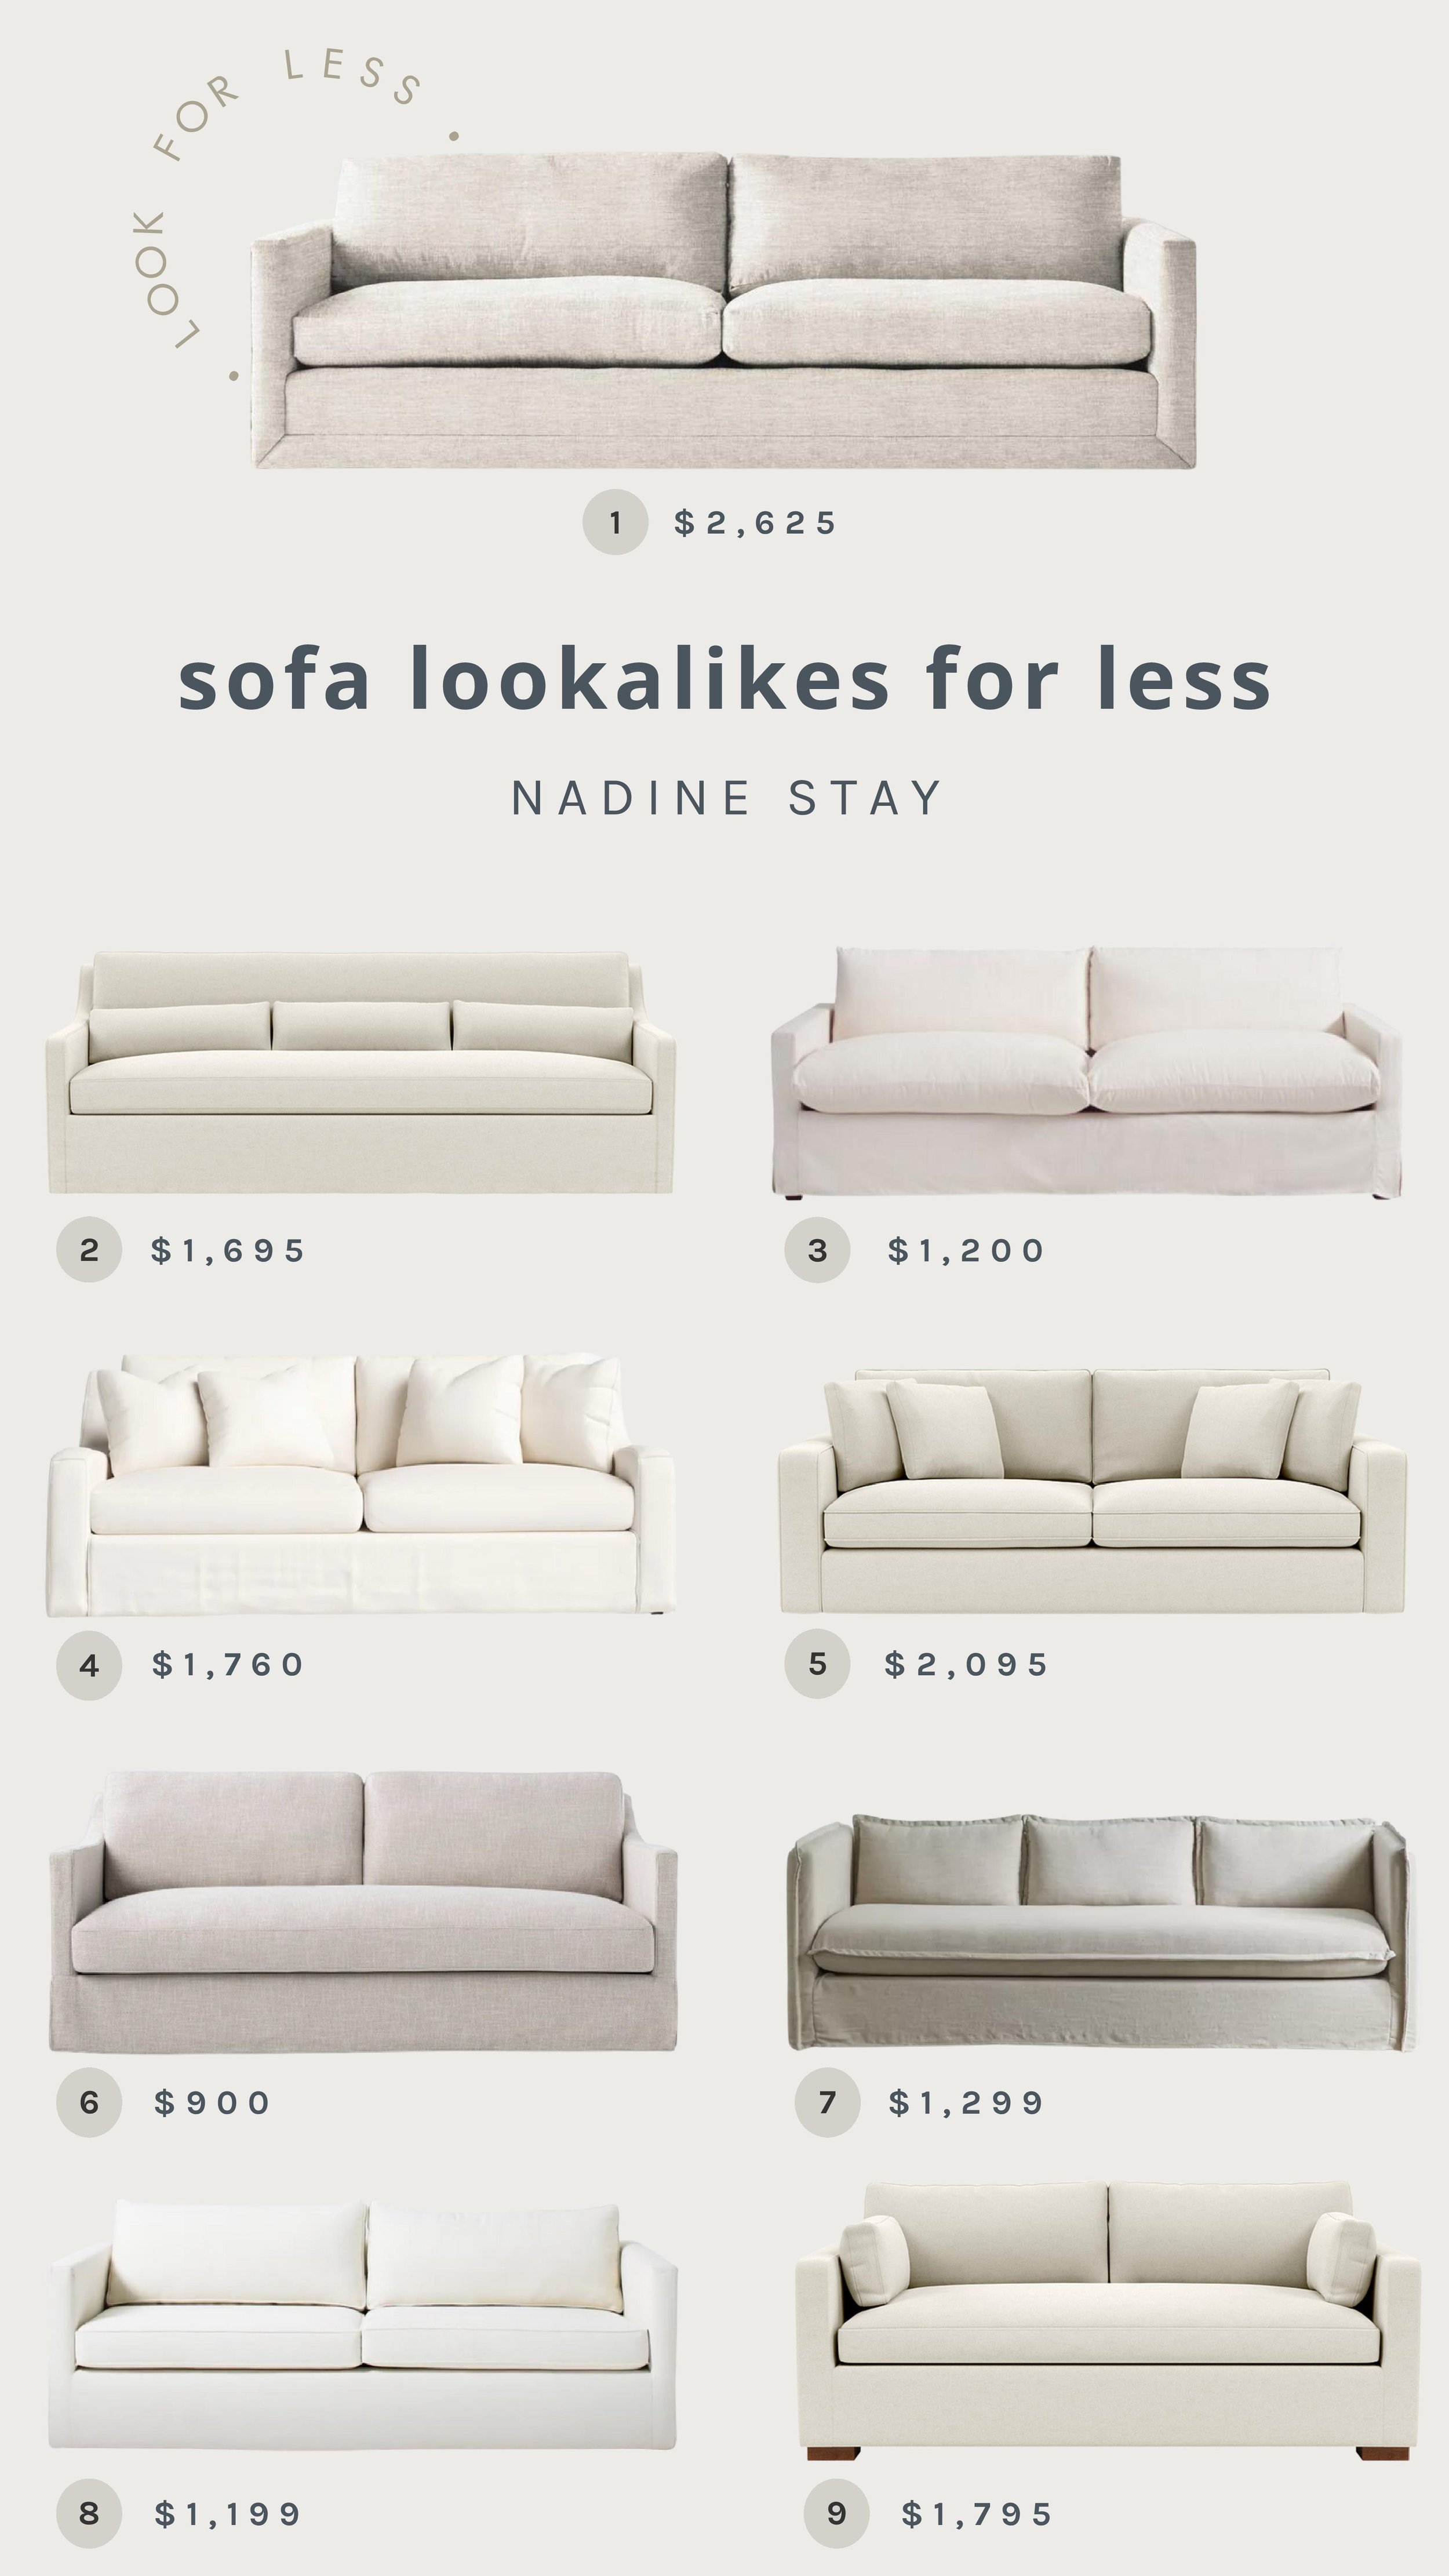 Maiden Home sofa lookalikes for less. Ivory california casual sofa recommendations. Where to buy quality sofas for less. Interior Define sofas I love. Target sofa by McGee & Co. Amber Interiors inspired sofas. | Nadine Stay